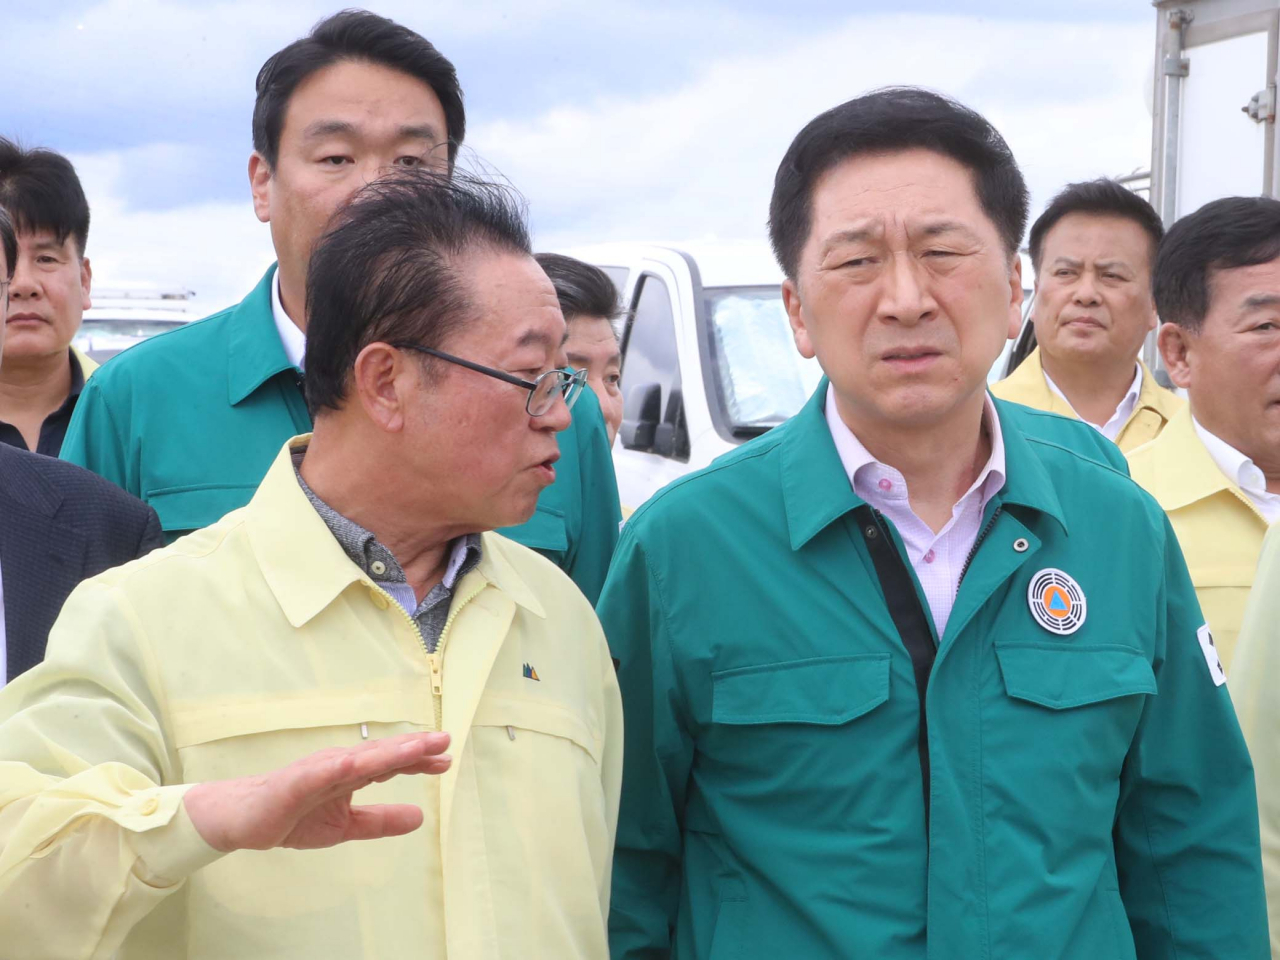 The ruling People Power Party head Rep. Kim Gi-hyeon (right) visits Osong, a North Chungcheong Province city, that suffered some of the more severe damages nationwide from the rains over the weekend. (Yonhap)